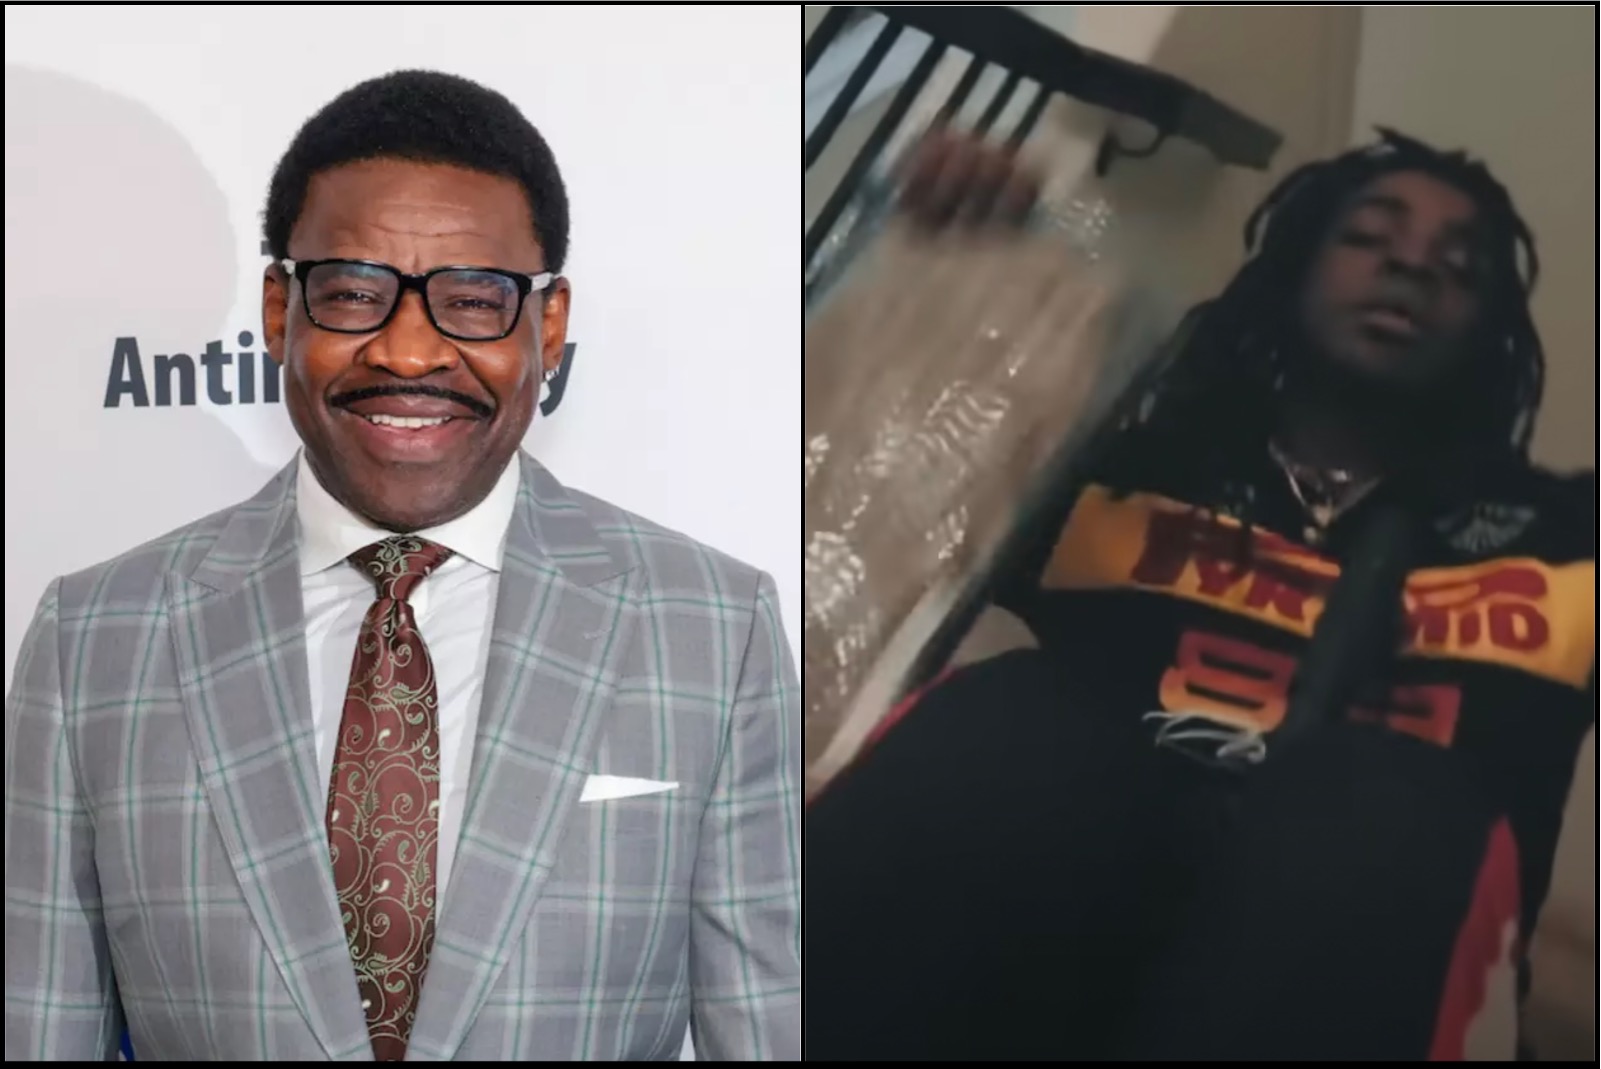 Michael Irvin Call Out His Rapper Son Tut Tarantino For Lying About Being a Gangsta and Living in Hood